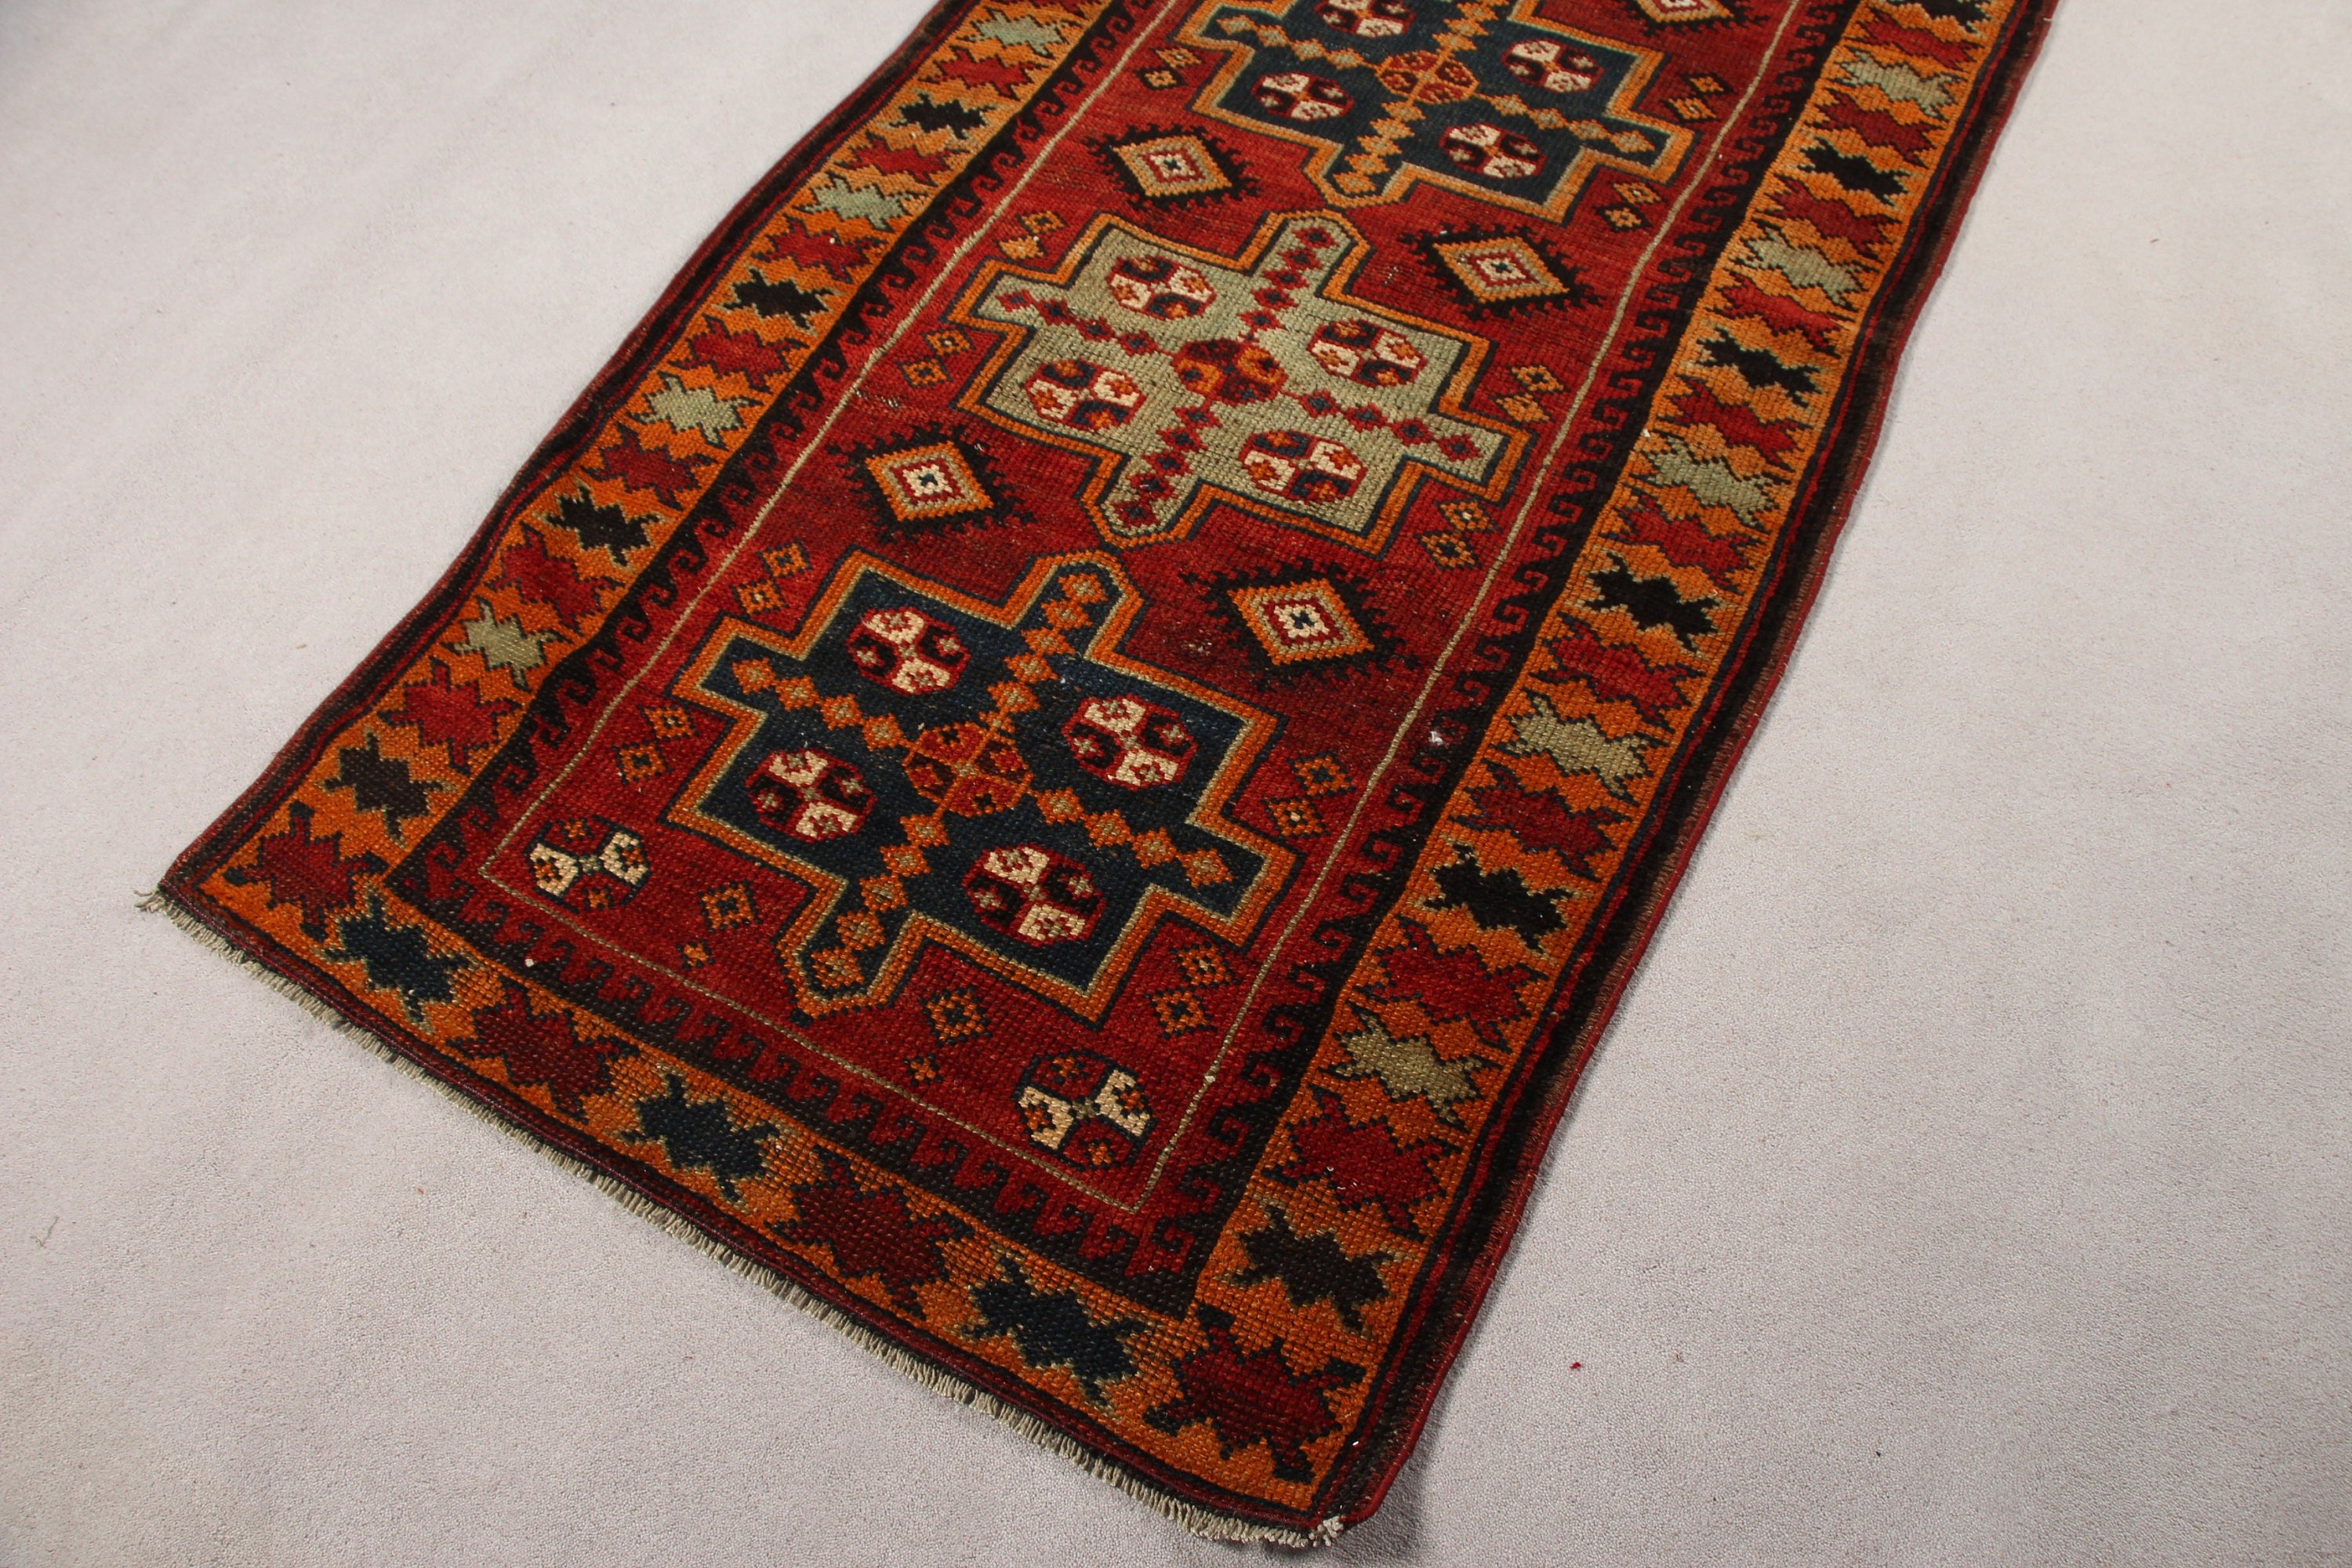 Vintage Rug, Anatolian Rug, Rugs for Kitchen, Entry Rugs, Kitchen Rug, Turkish Rugs, Bedroom Rug, Red Cool Rug, 3.1x6.8 ft Accent Rug